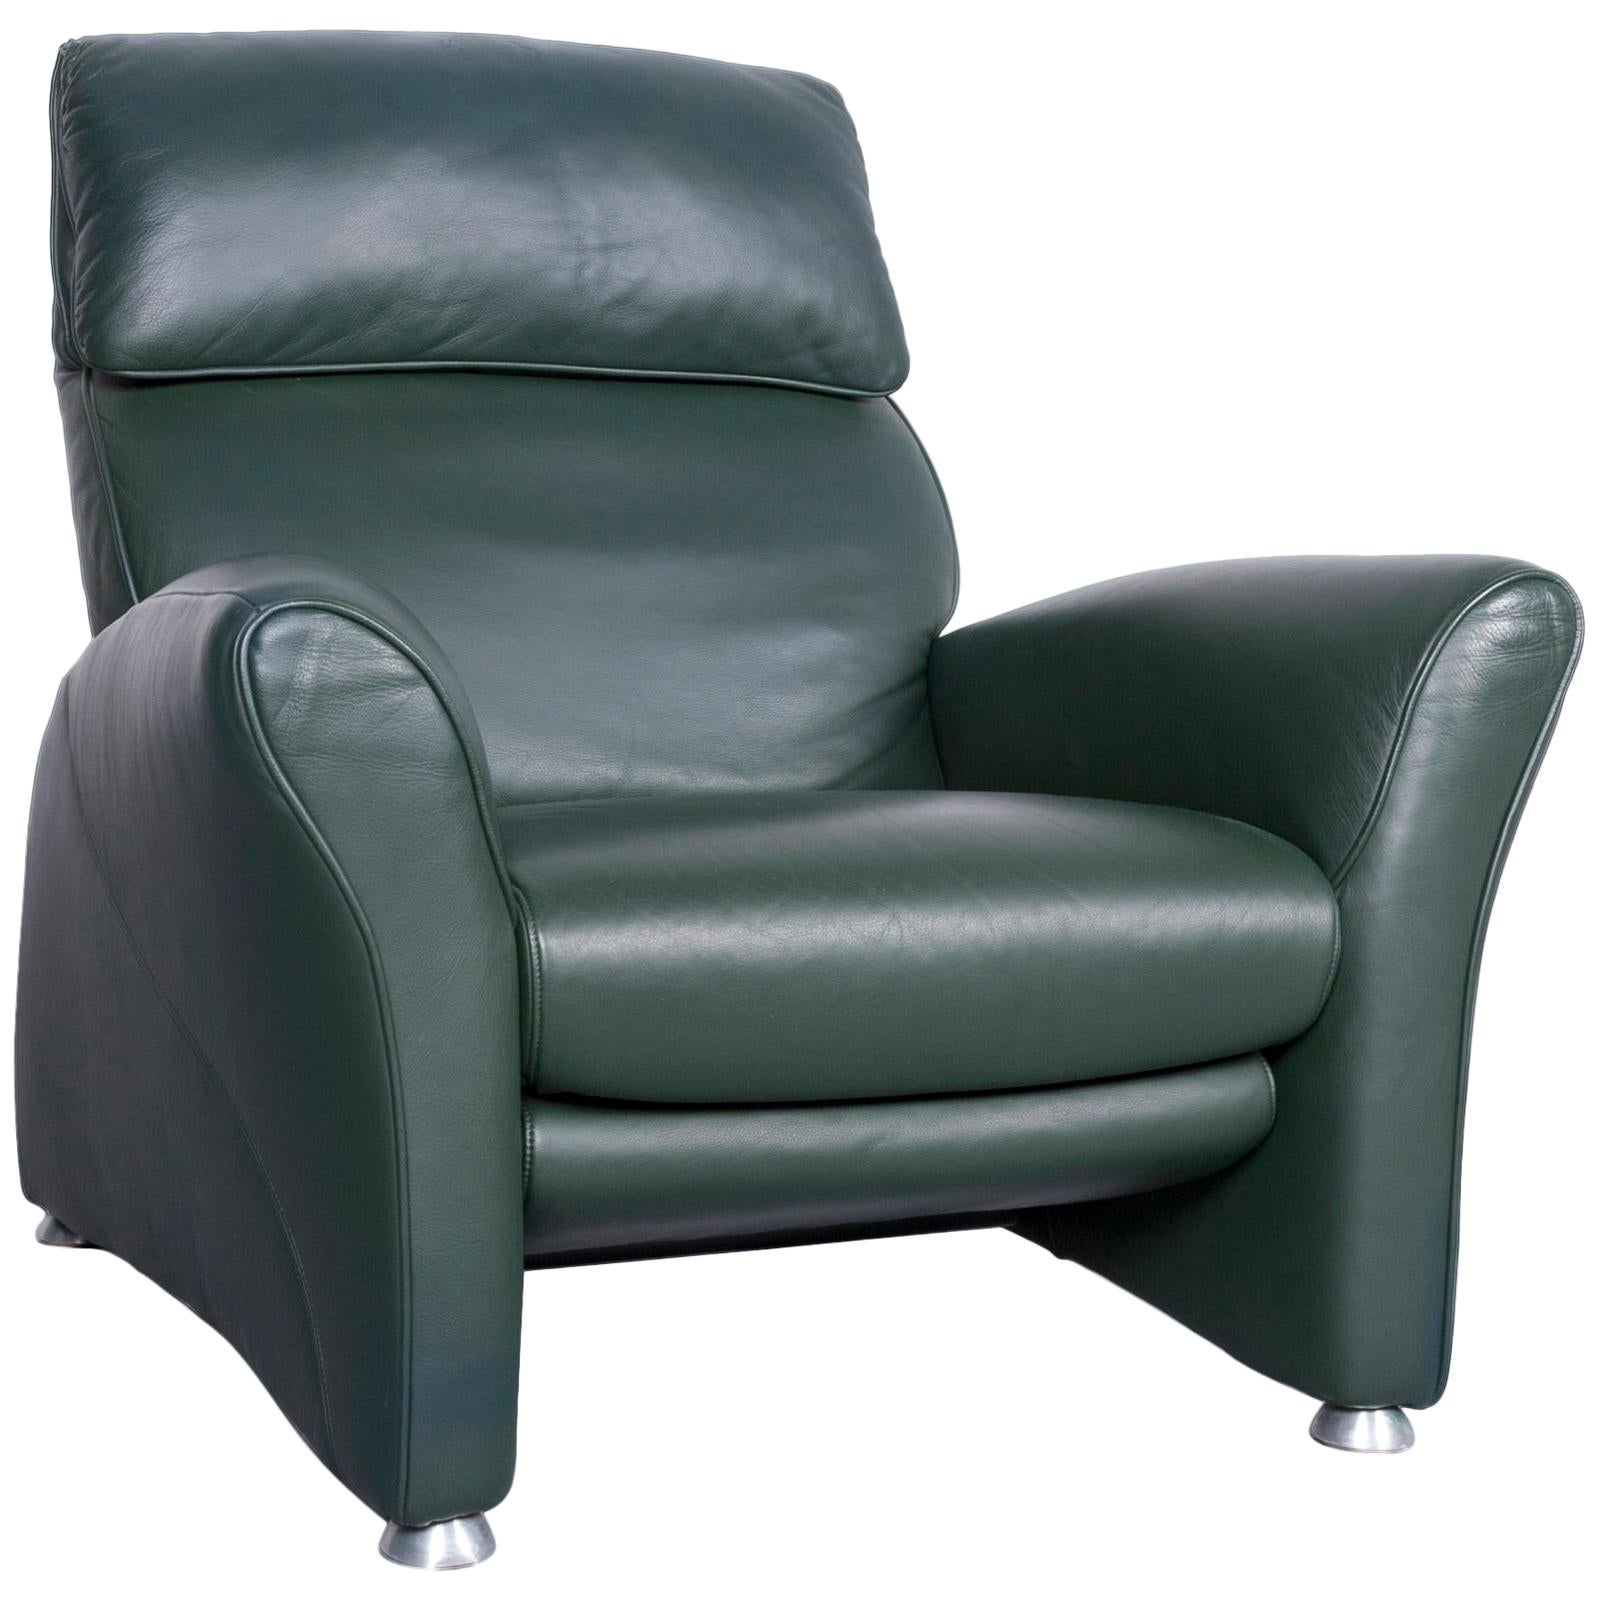 Musterring Designer Leather Armchair Green One-Seat Chair